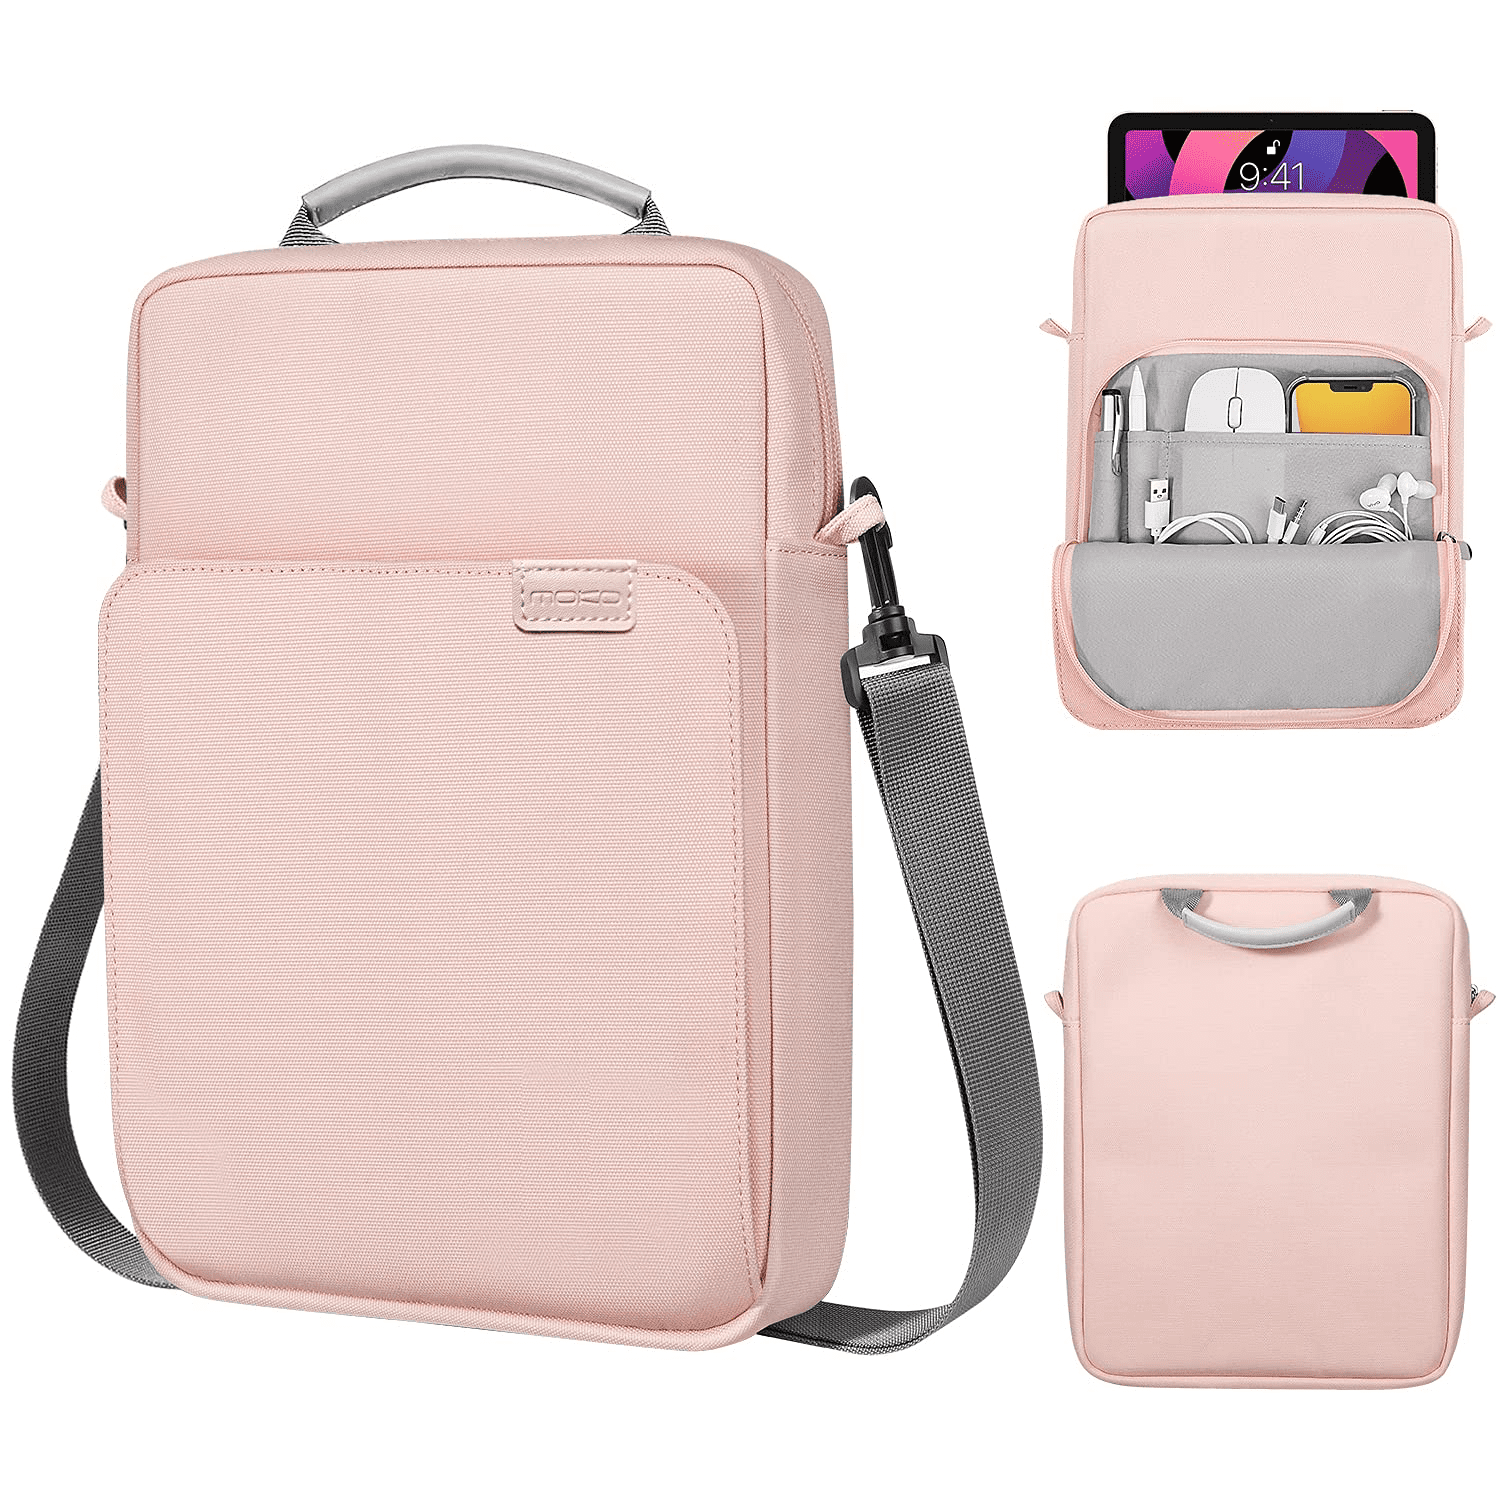 11 inch iPad Pro Cases and Bags